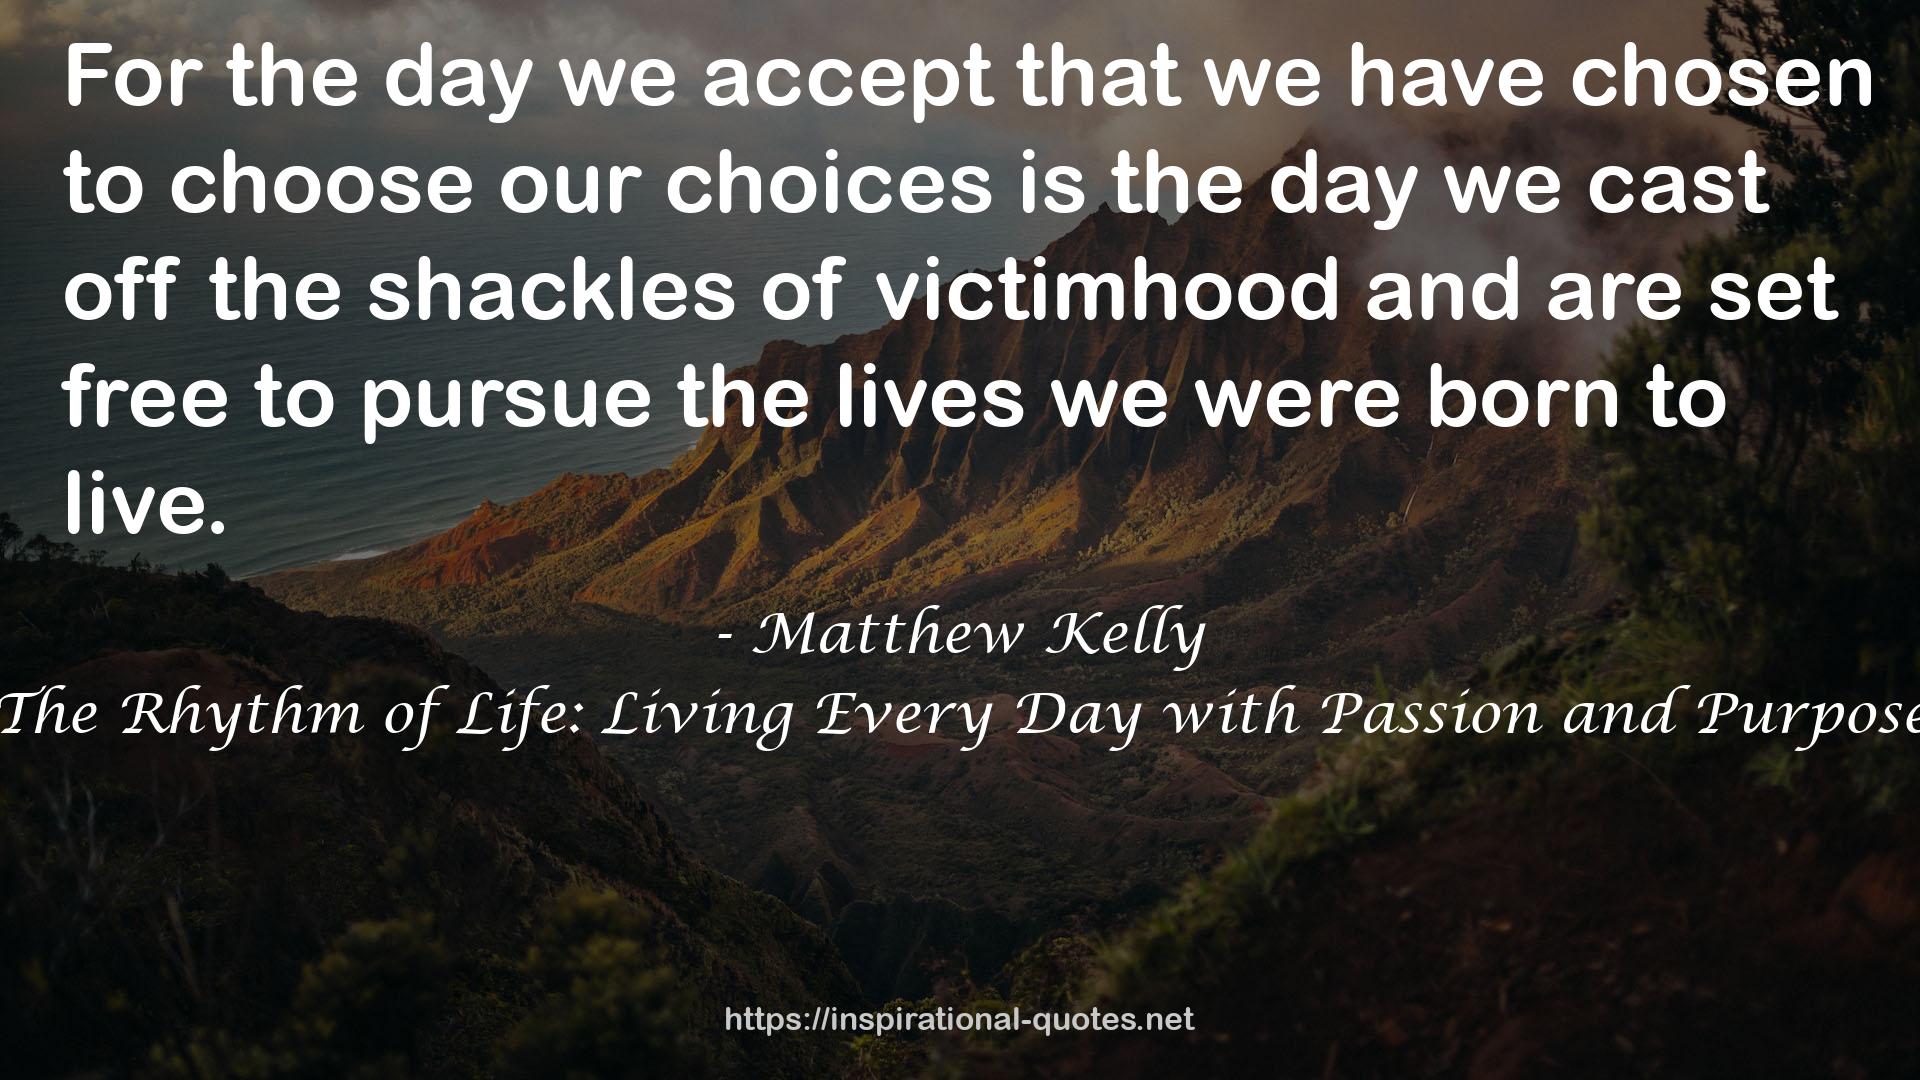 The Rhythm of Life: Living Every Day with Passion and Purpose QUOTES